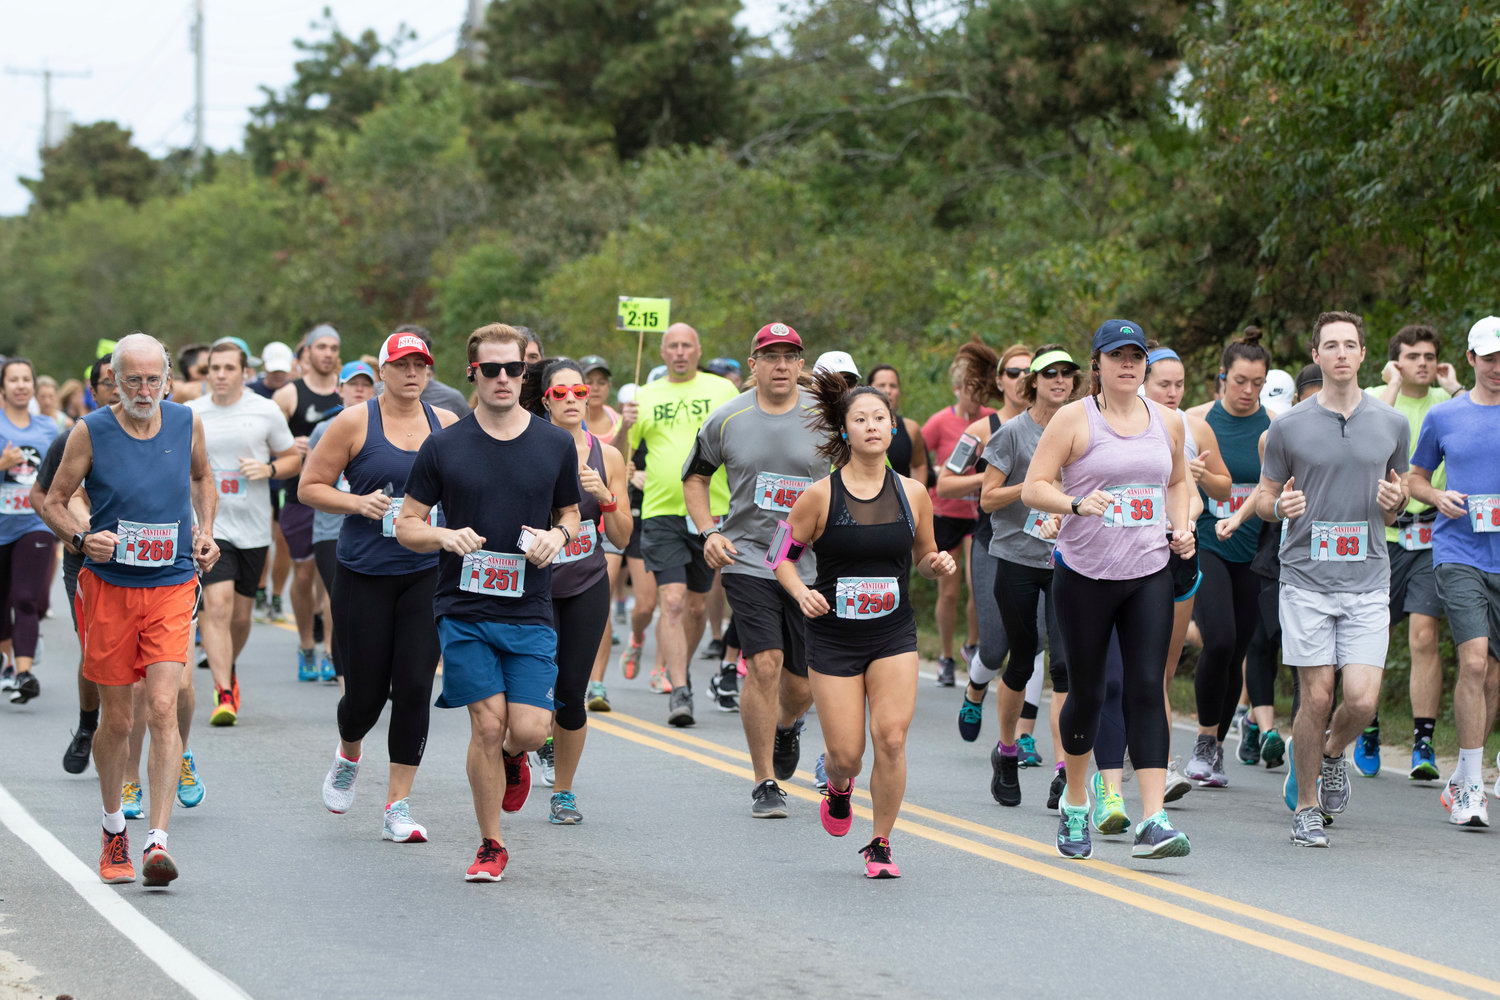 The Nantucket Half Marathon has a new course this year, taking runners along tree-lined bike paths, quiet neighborhood streets and winding dirt roads with ocean views. The race is scheduled for Sunday, Oct. 9.